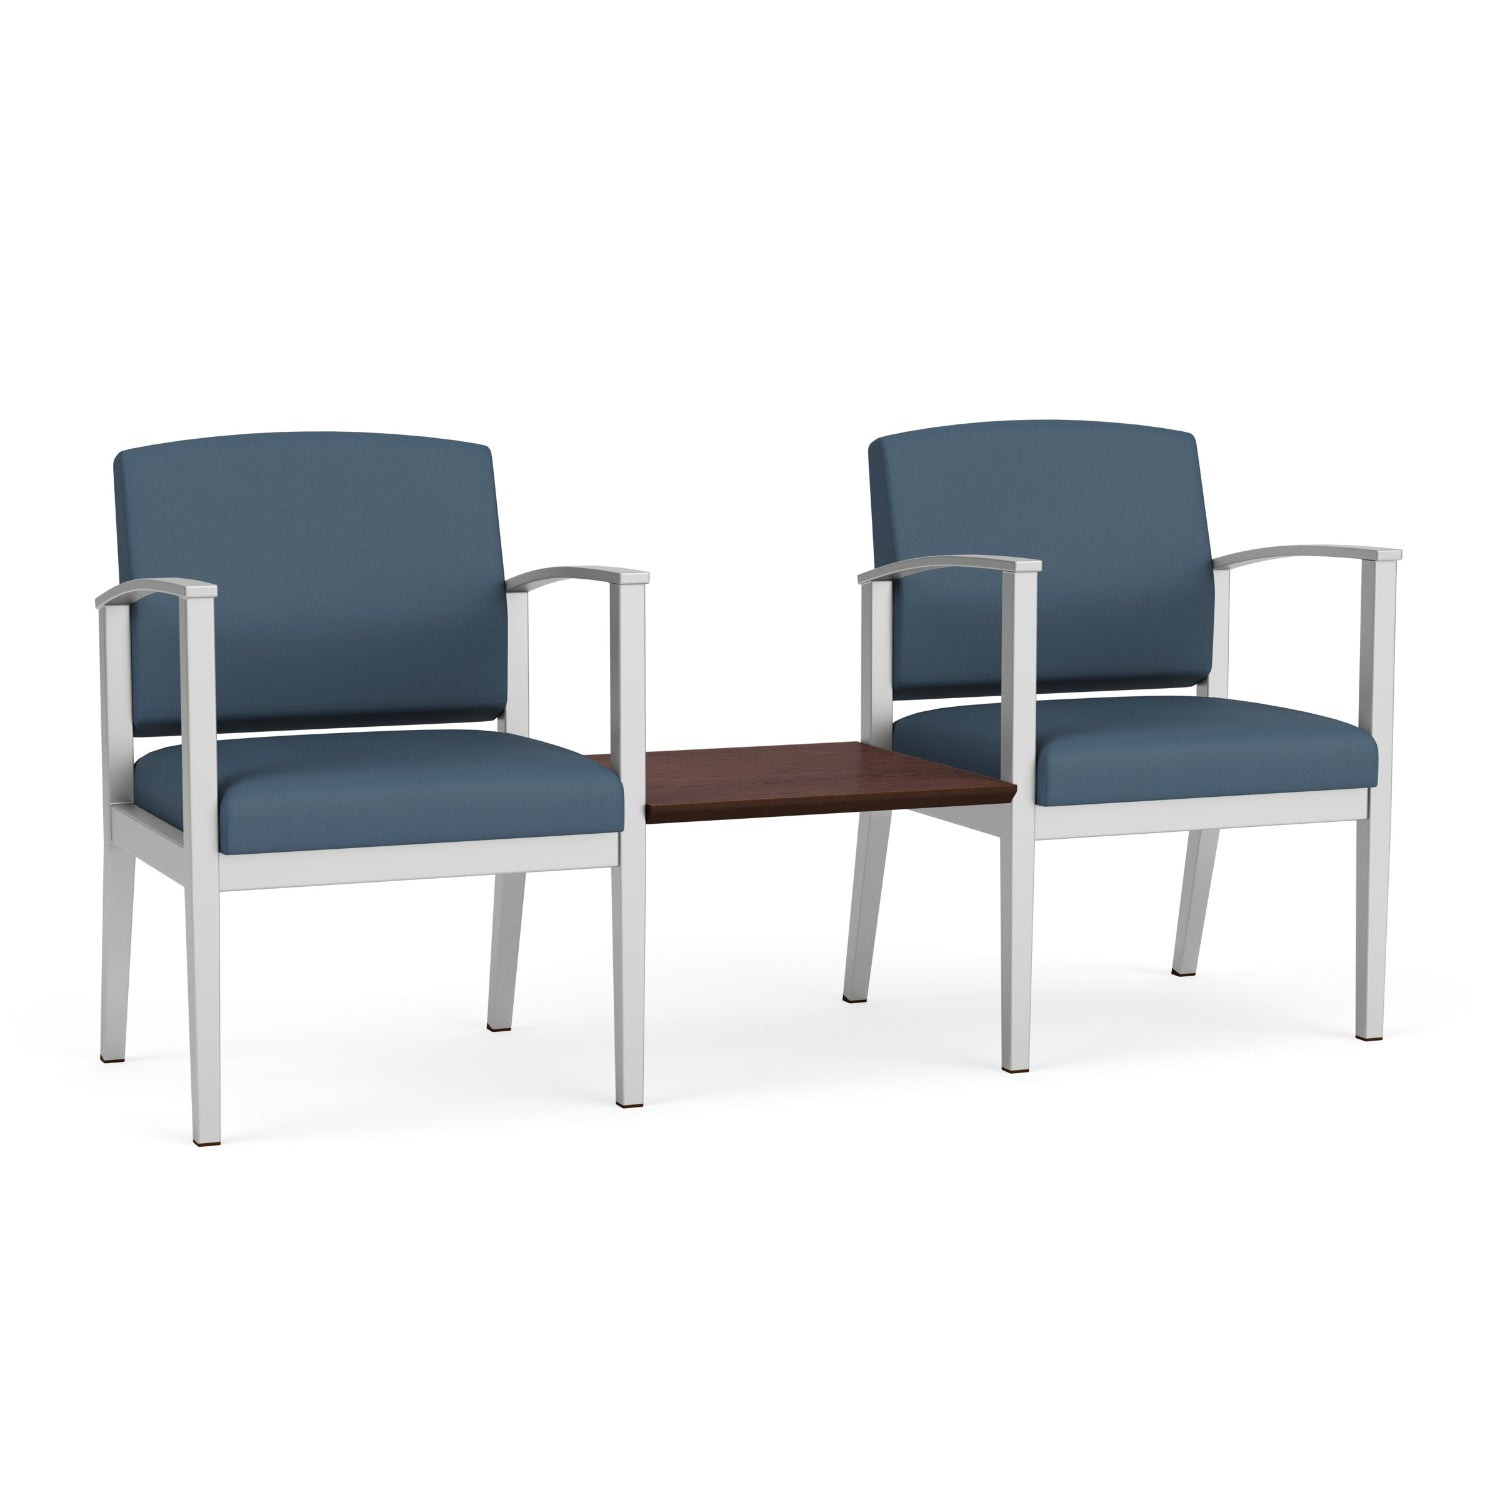 Amherst Steel Collection Reception Seating, 2 Chairs with Connecting Center Table, Standard Vinyl Upholstery, FREE SHIPPING